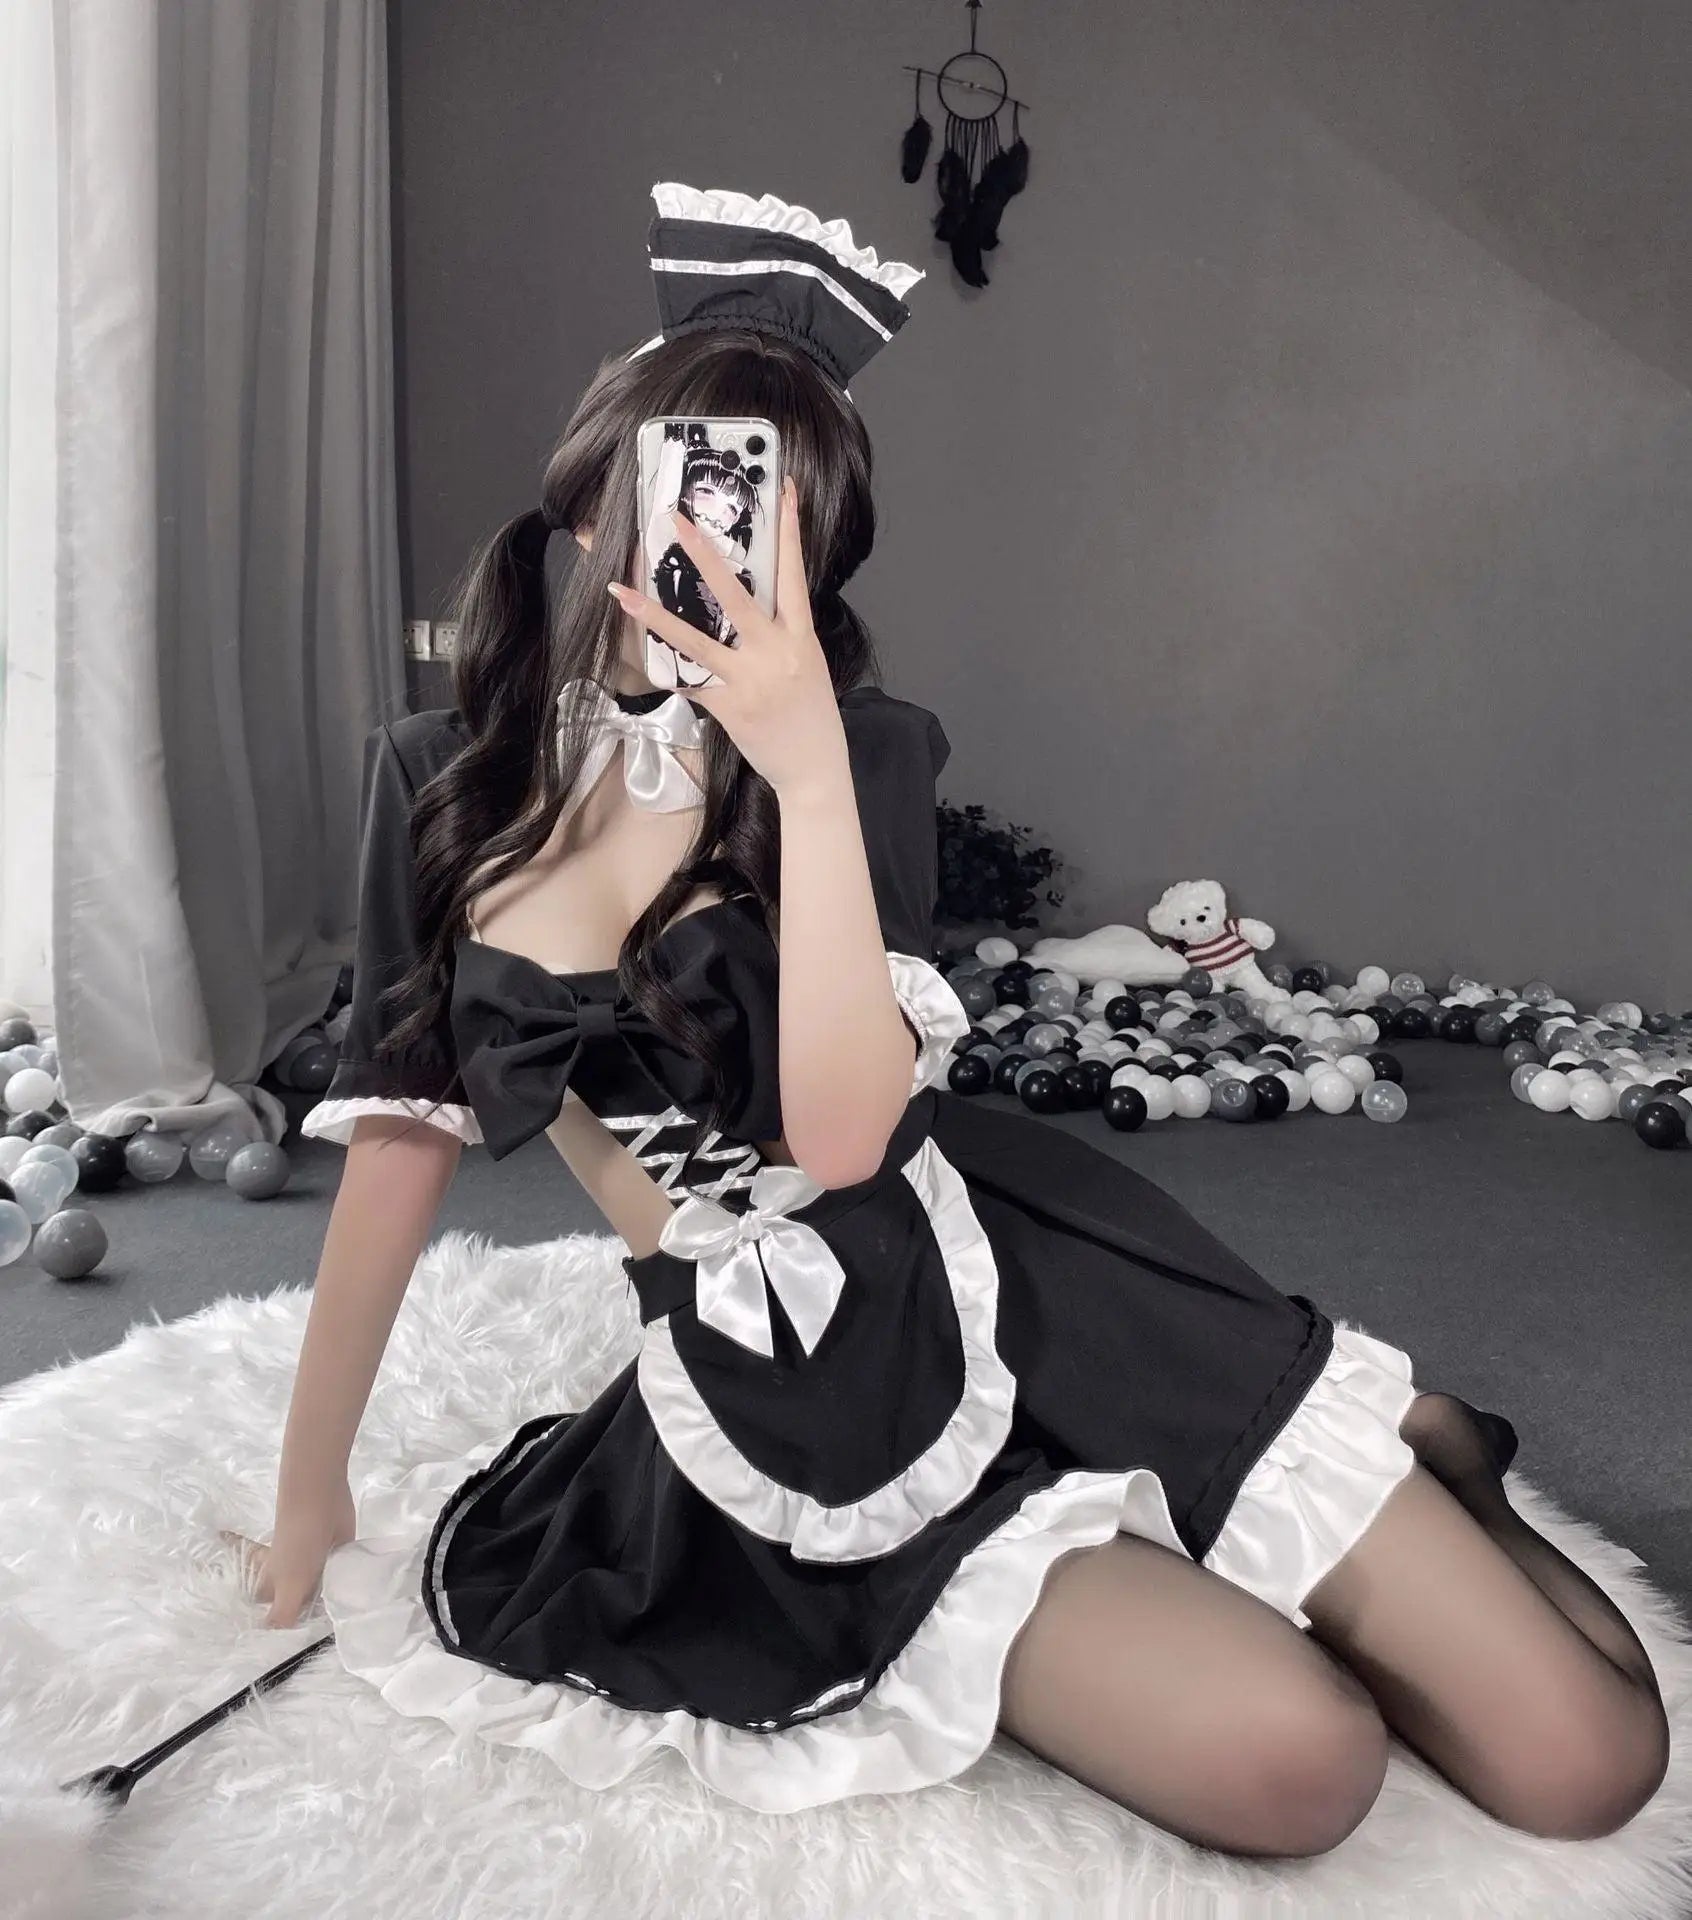 LOVEMI - Erotic Lingerie Bed Maid Outfit Passion Suit